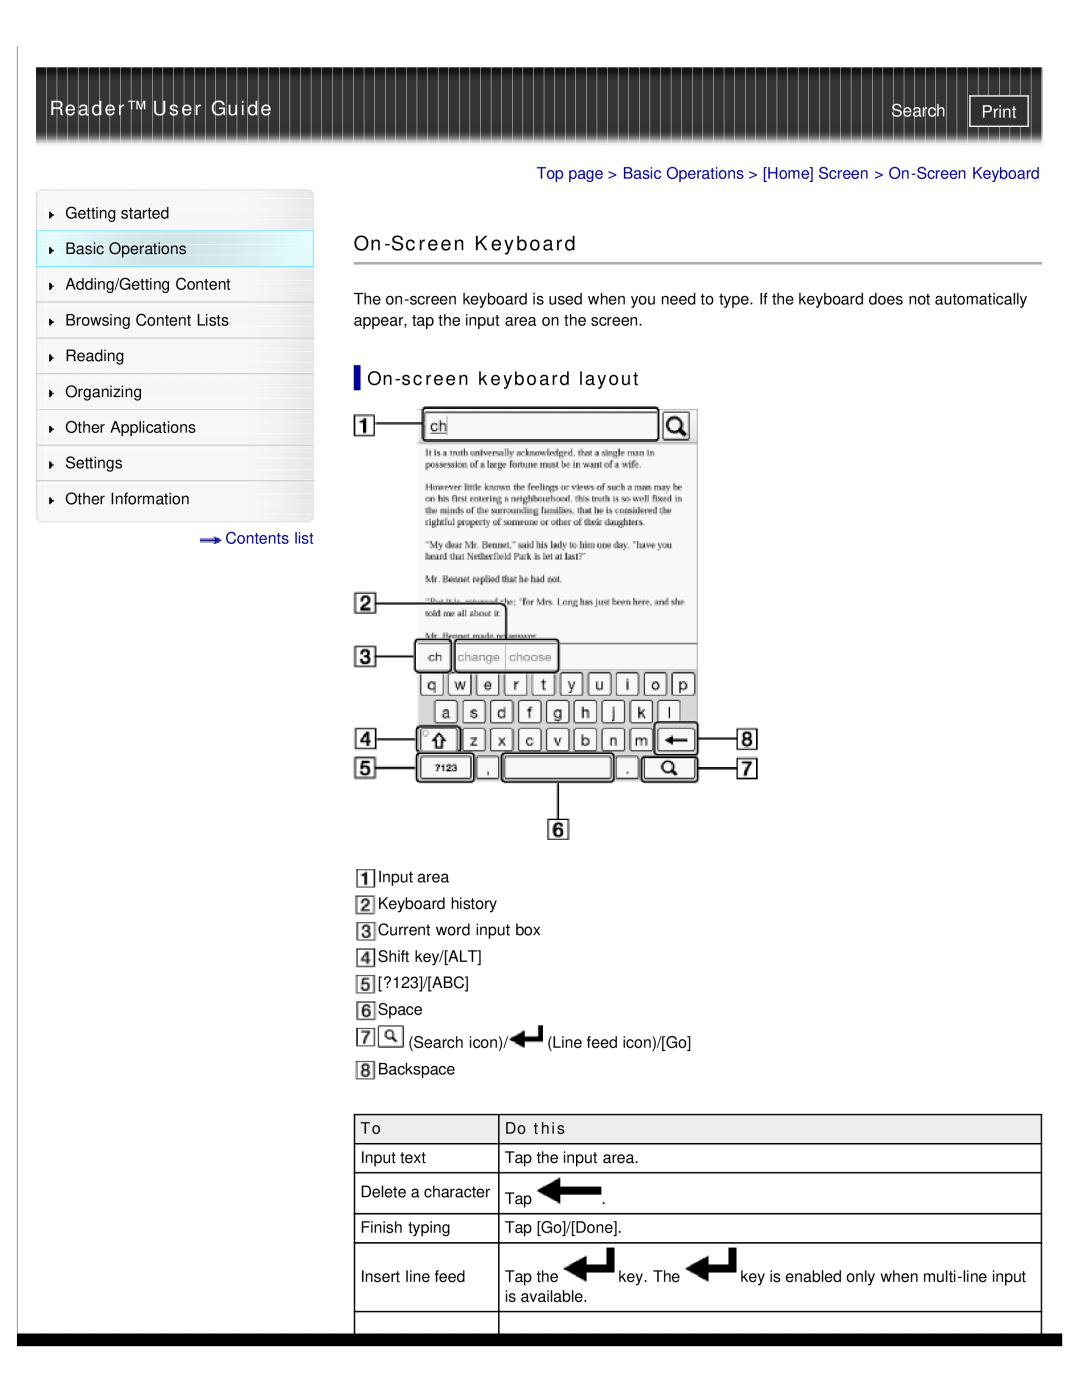 Sony PRS-T1RC On-Screen Keyboard, On-screen keyboard layout, Reader User Guide, Search, Print, Contents list, Do this 